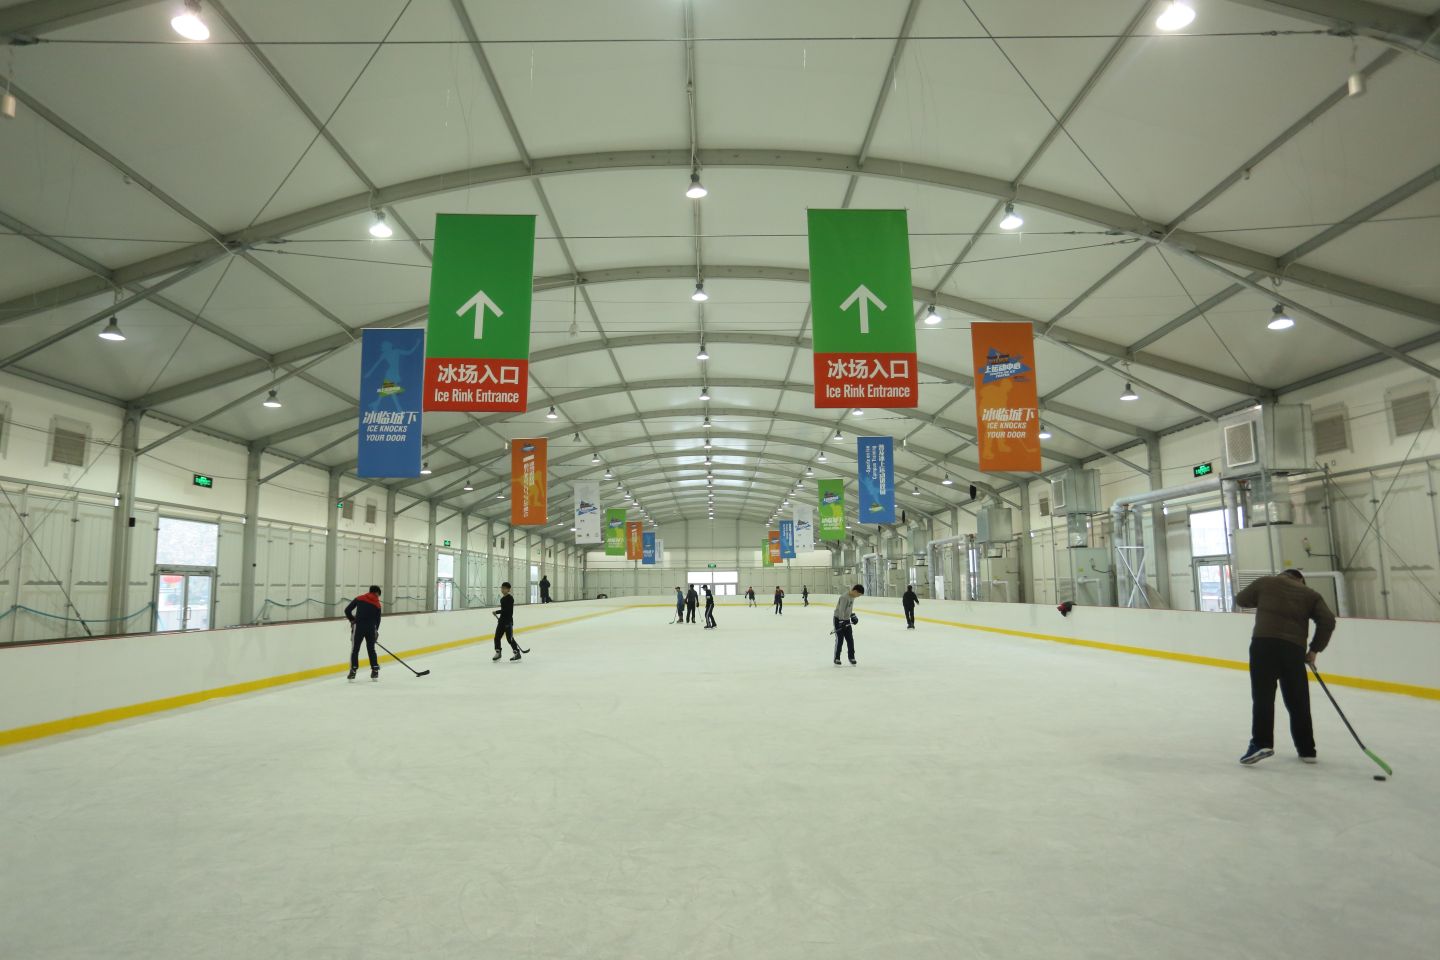 Ice Rink Hall at Beijing China Millennium Monument-Beijing, China-Losberger-De-Boer-32628-small.jpg